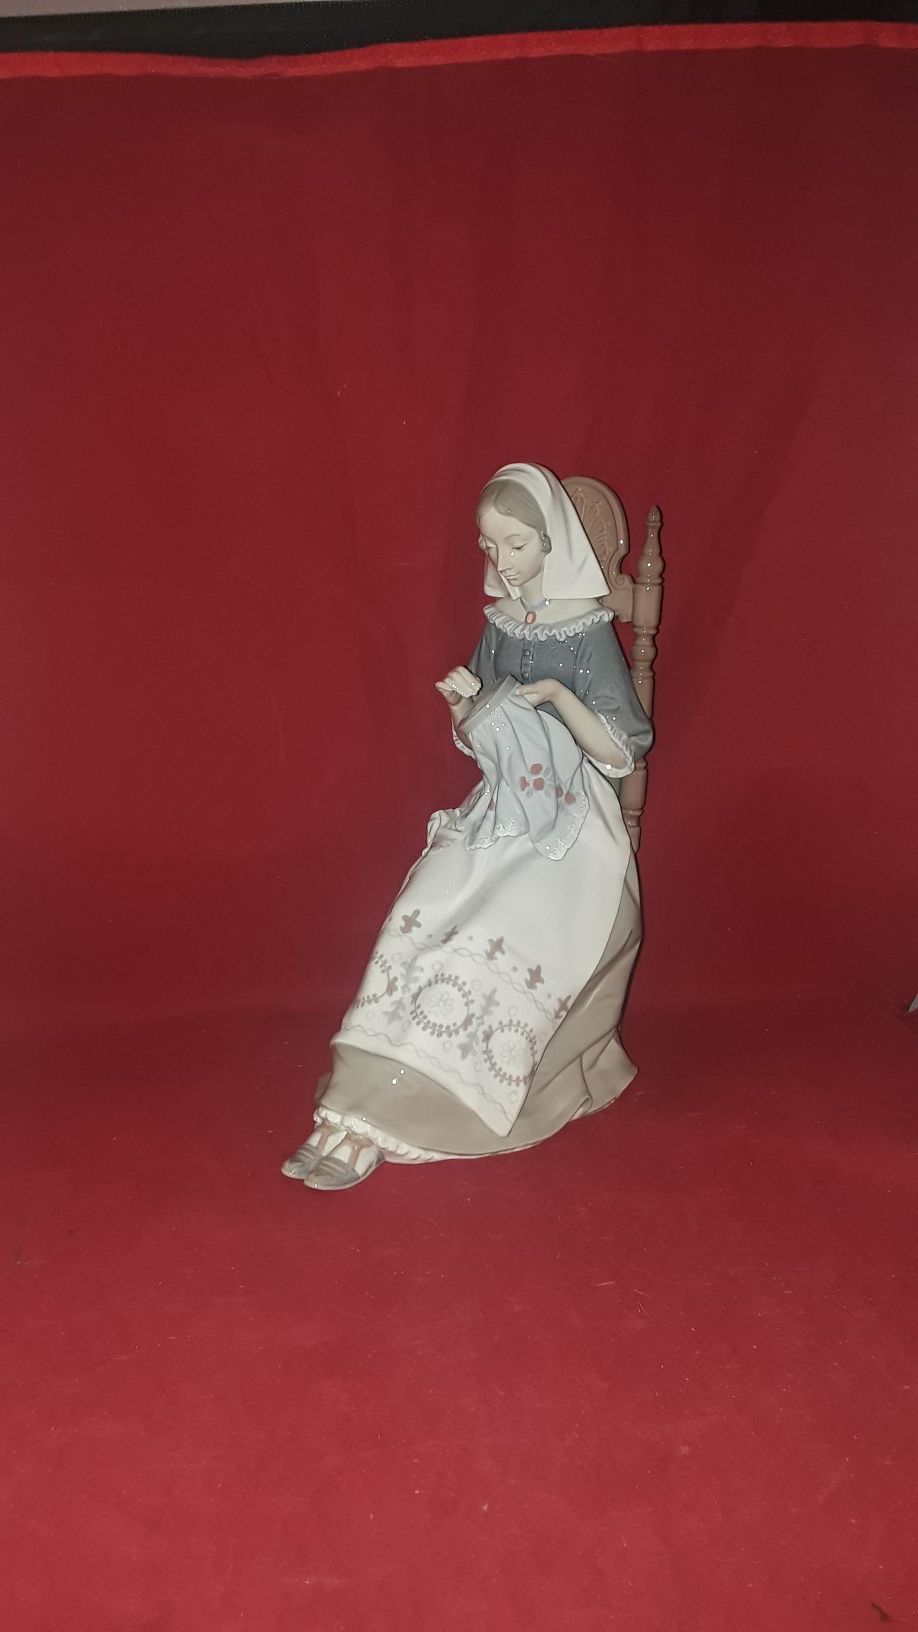 LLADRO RETIRED #4865 "THE EMBROIDERER" LADY HI GLOSS FINE PORCELAIN SCULPTURE FIGURINE IN ORIG BOX 11-1/2" TALL